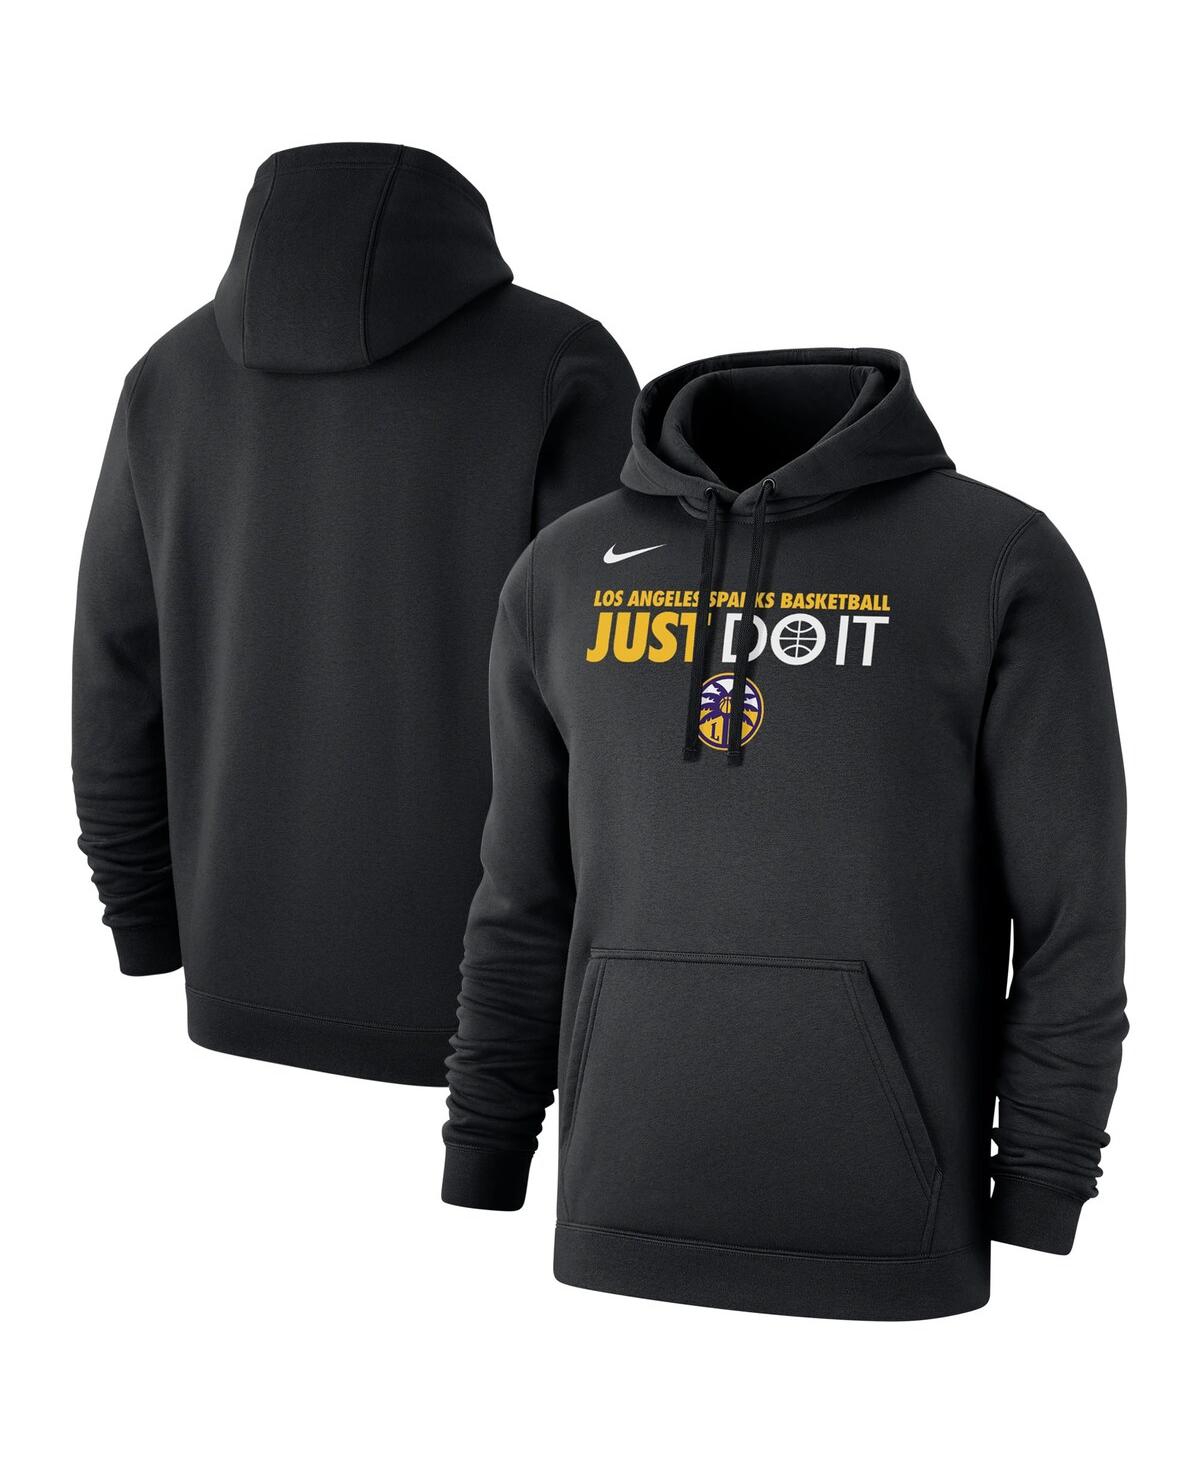 Shop Nike Men's And Women's  Black Los Angeles Sparks Just Do It Club Pullover Hoodie